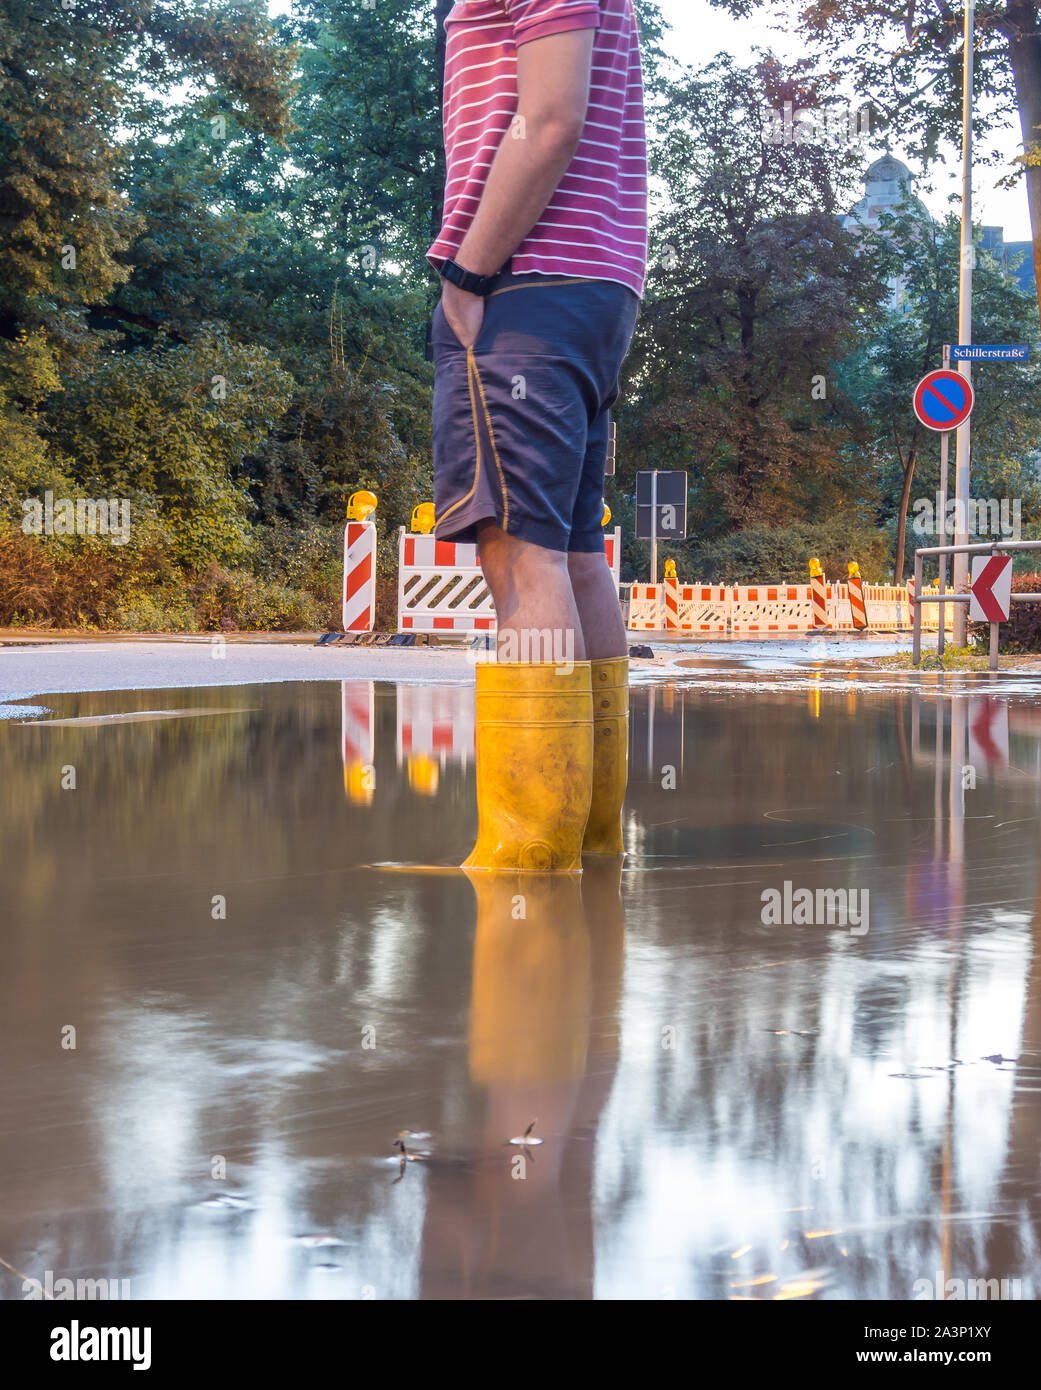 no way out flooded street Stock Photo